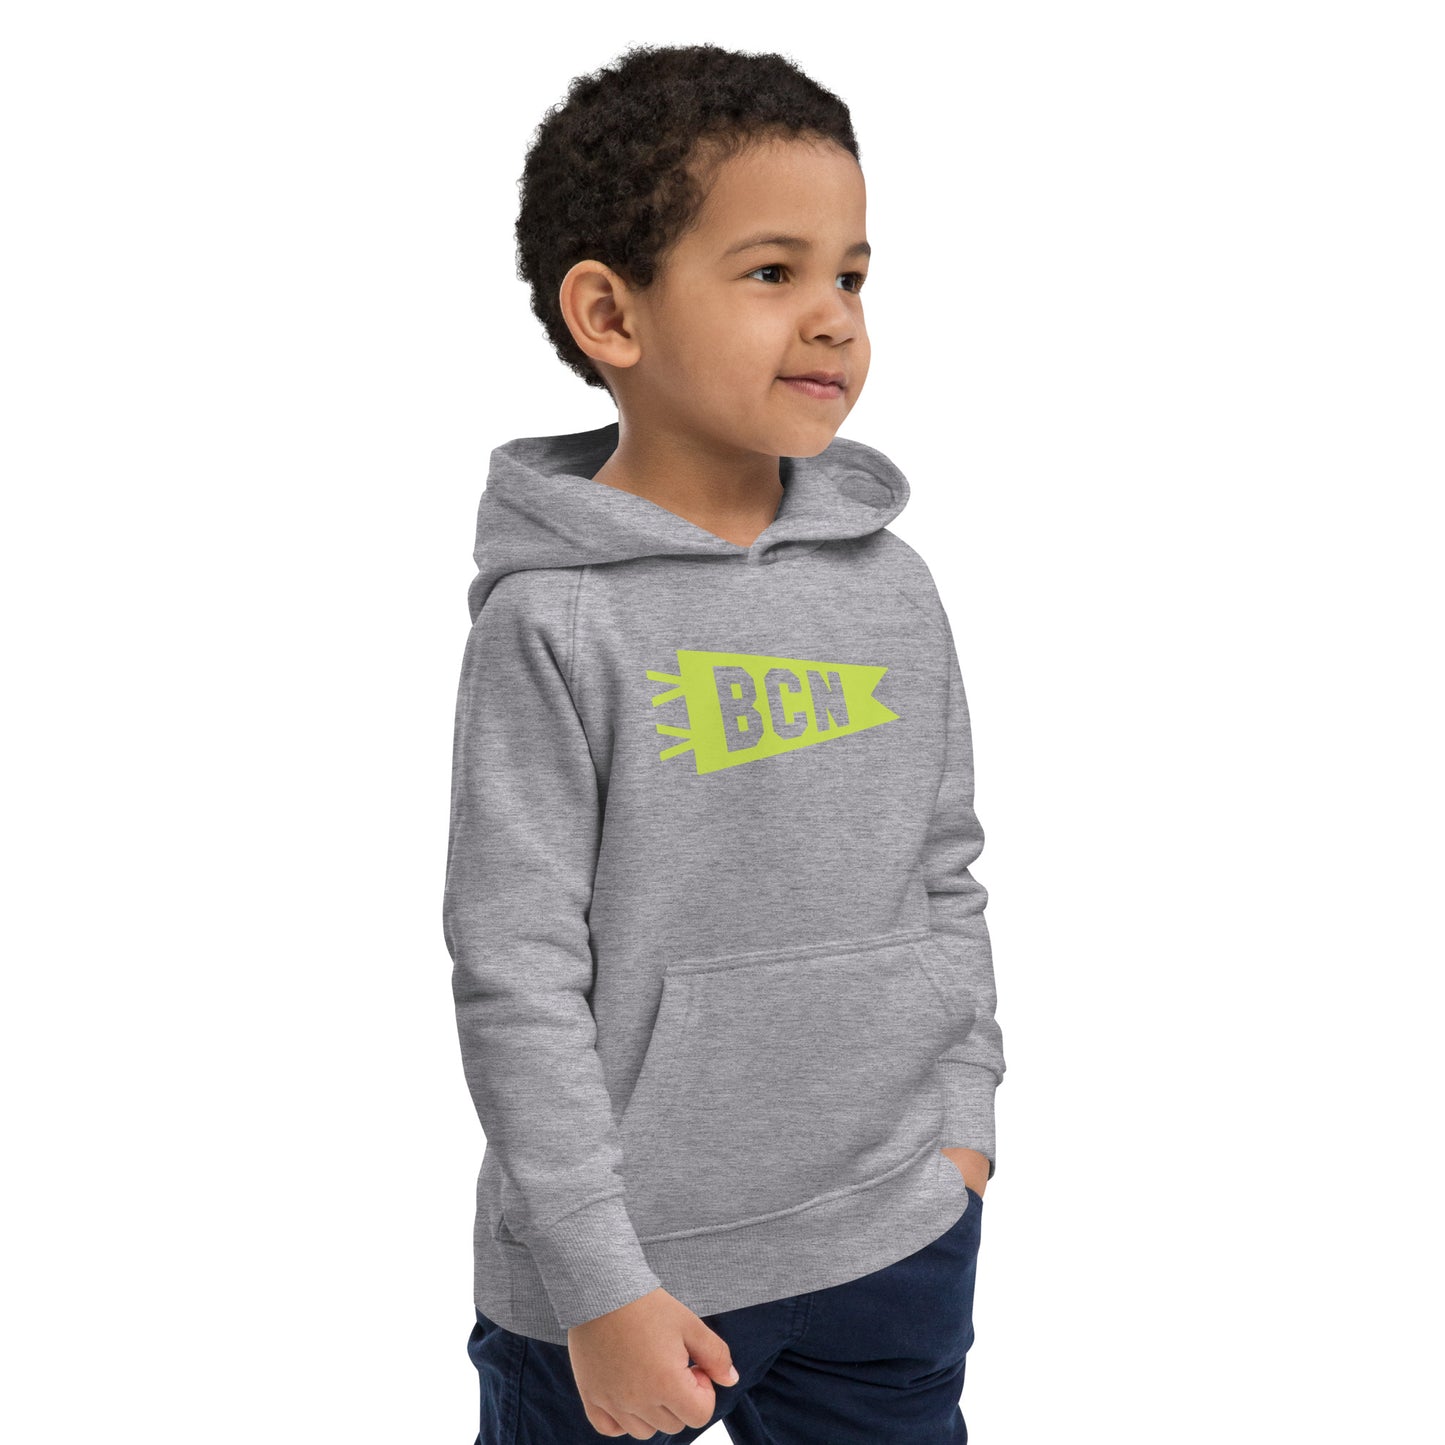 Kid's Sustainable Hoodie - Green Graphic • BCN Barcelona • YHM Designs - Image 13